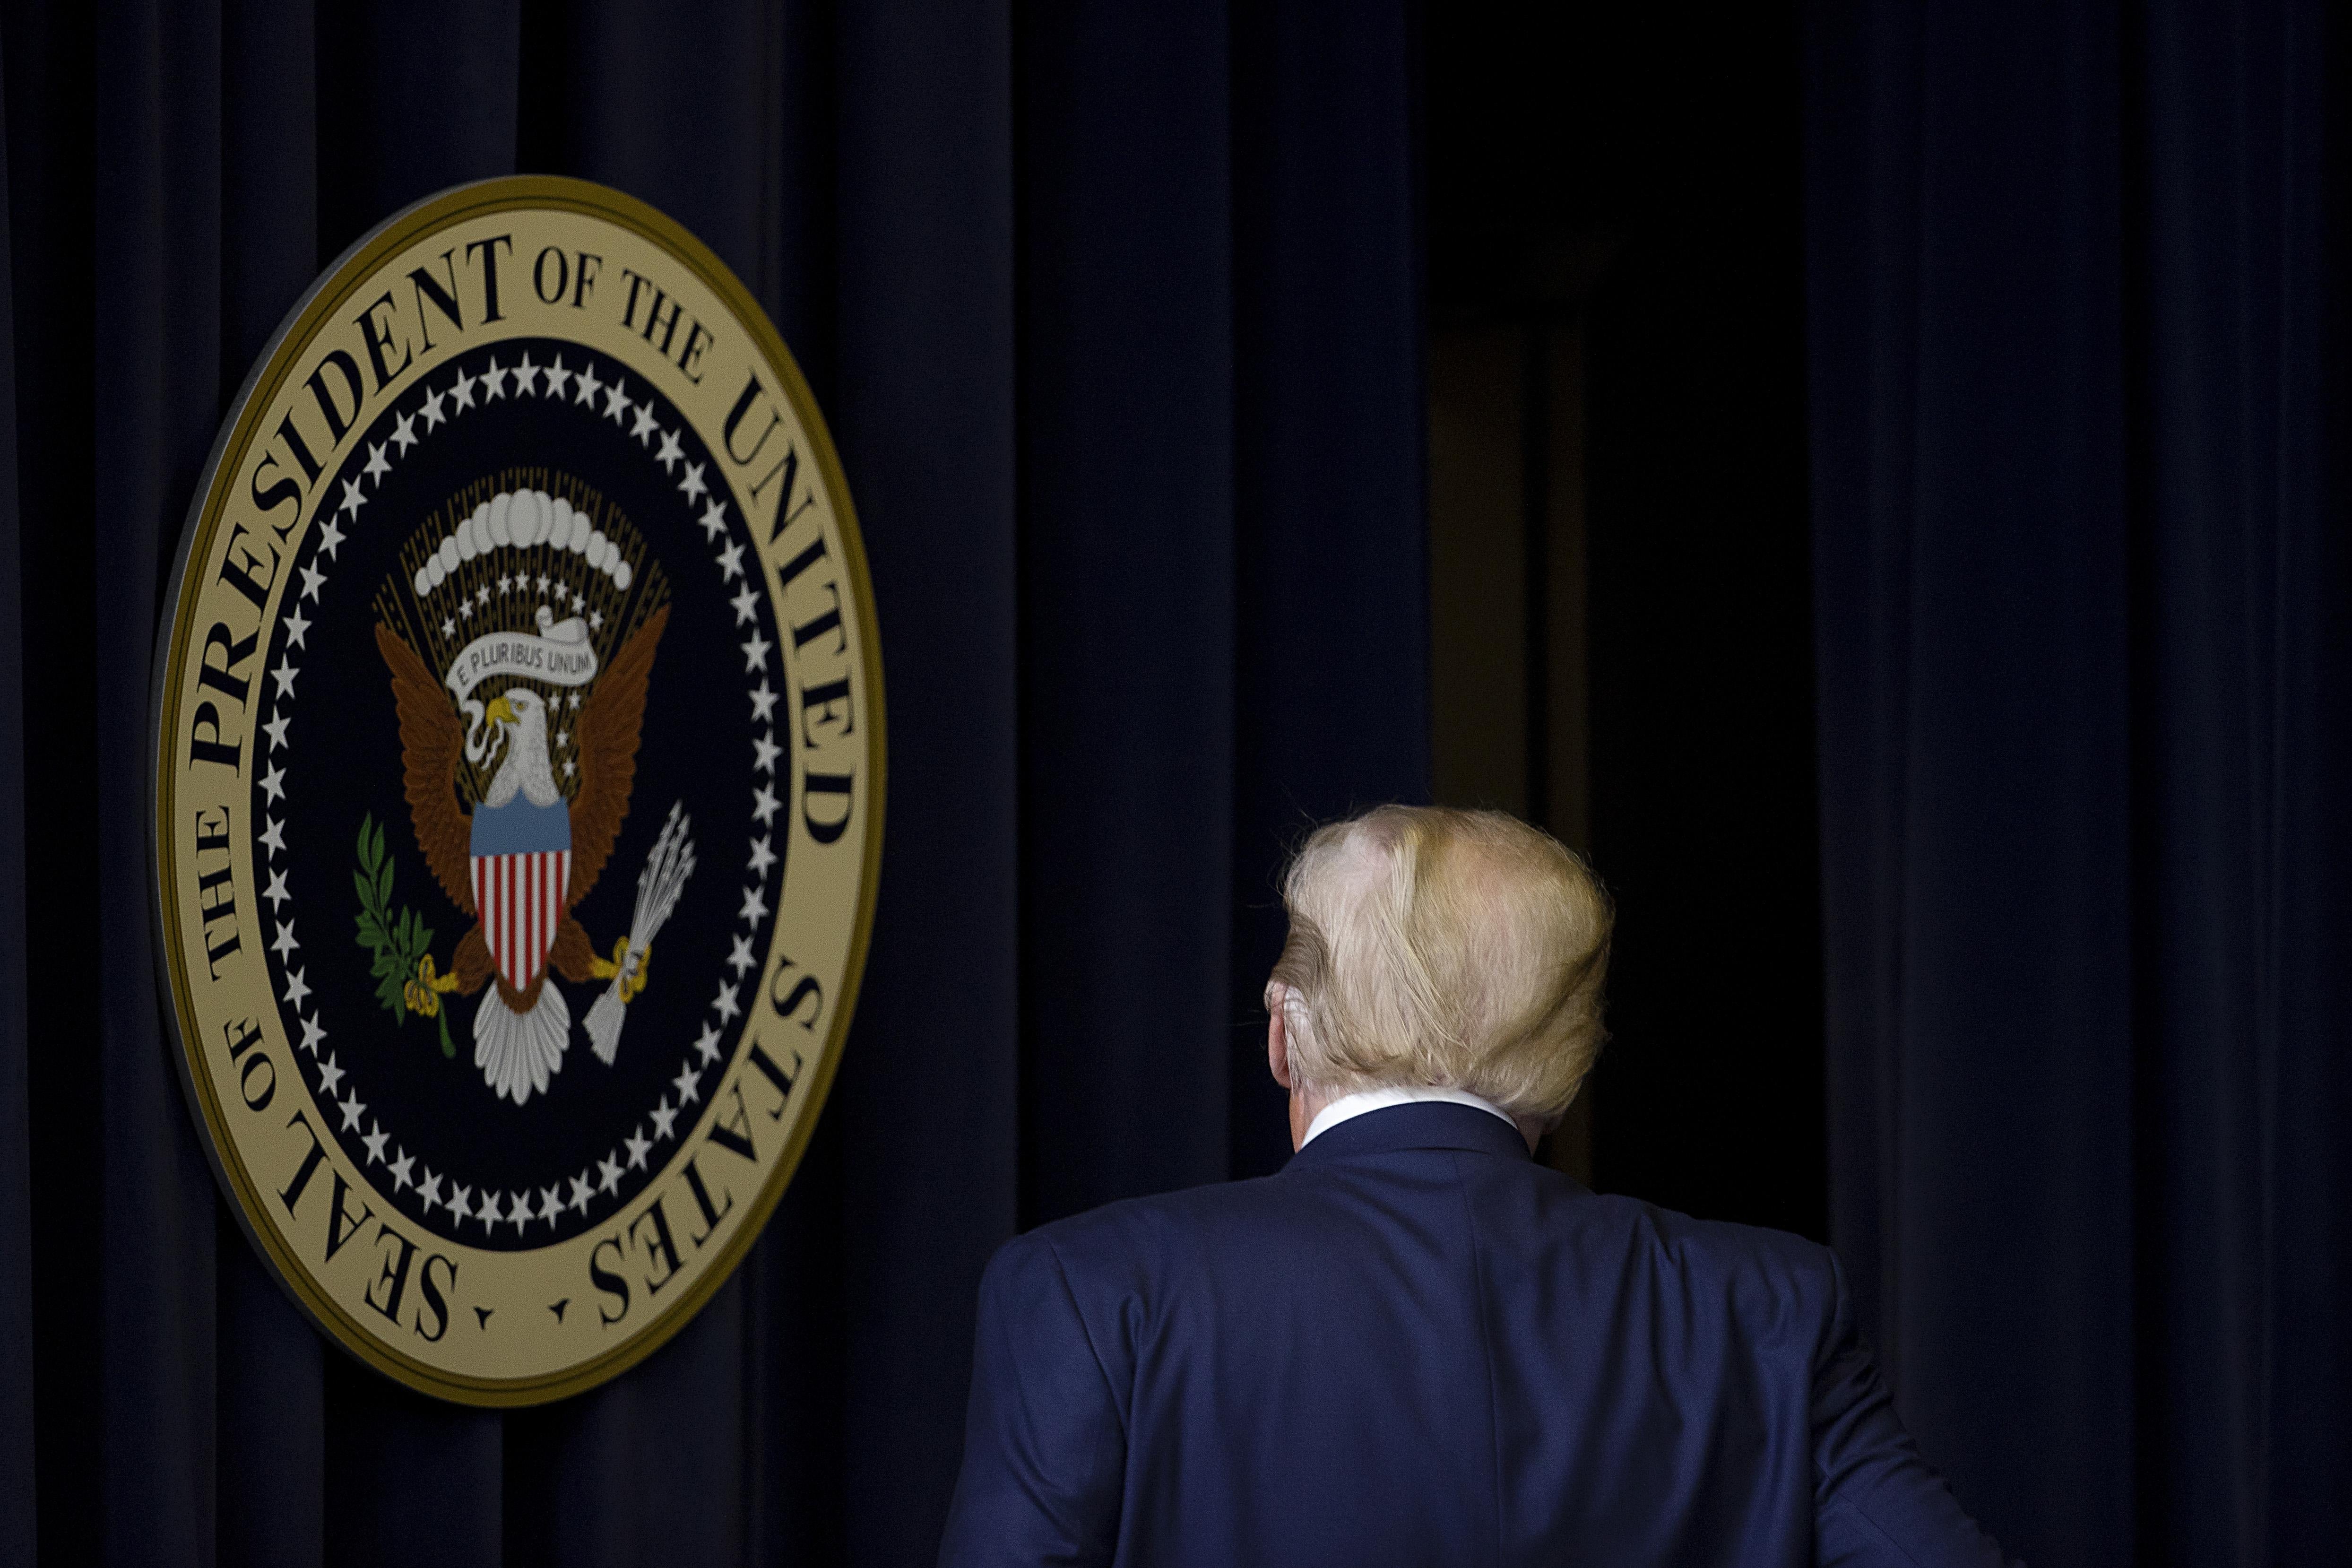 Trump, seen from the back, walking past the presidential seal hanging in front of a curtain